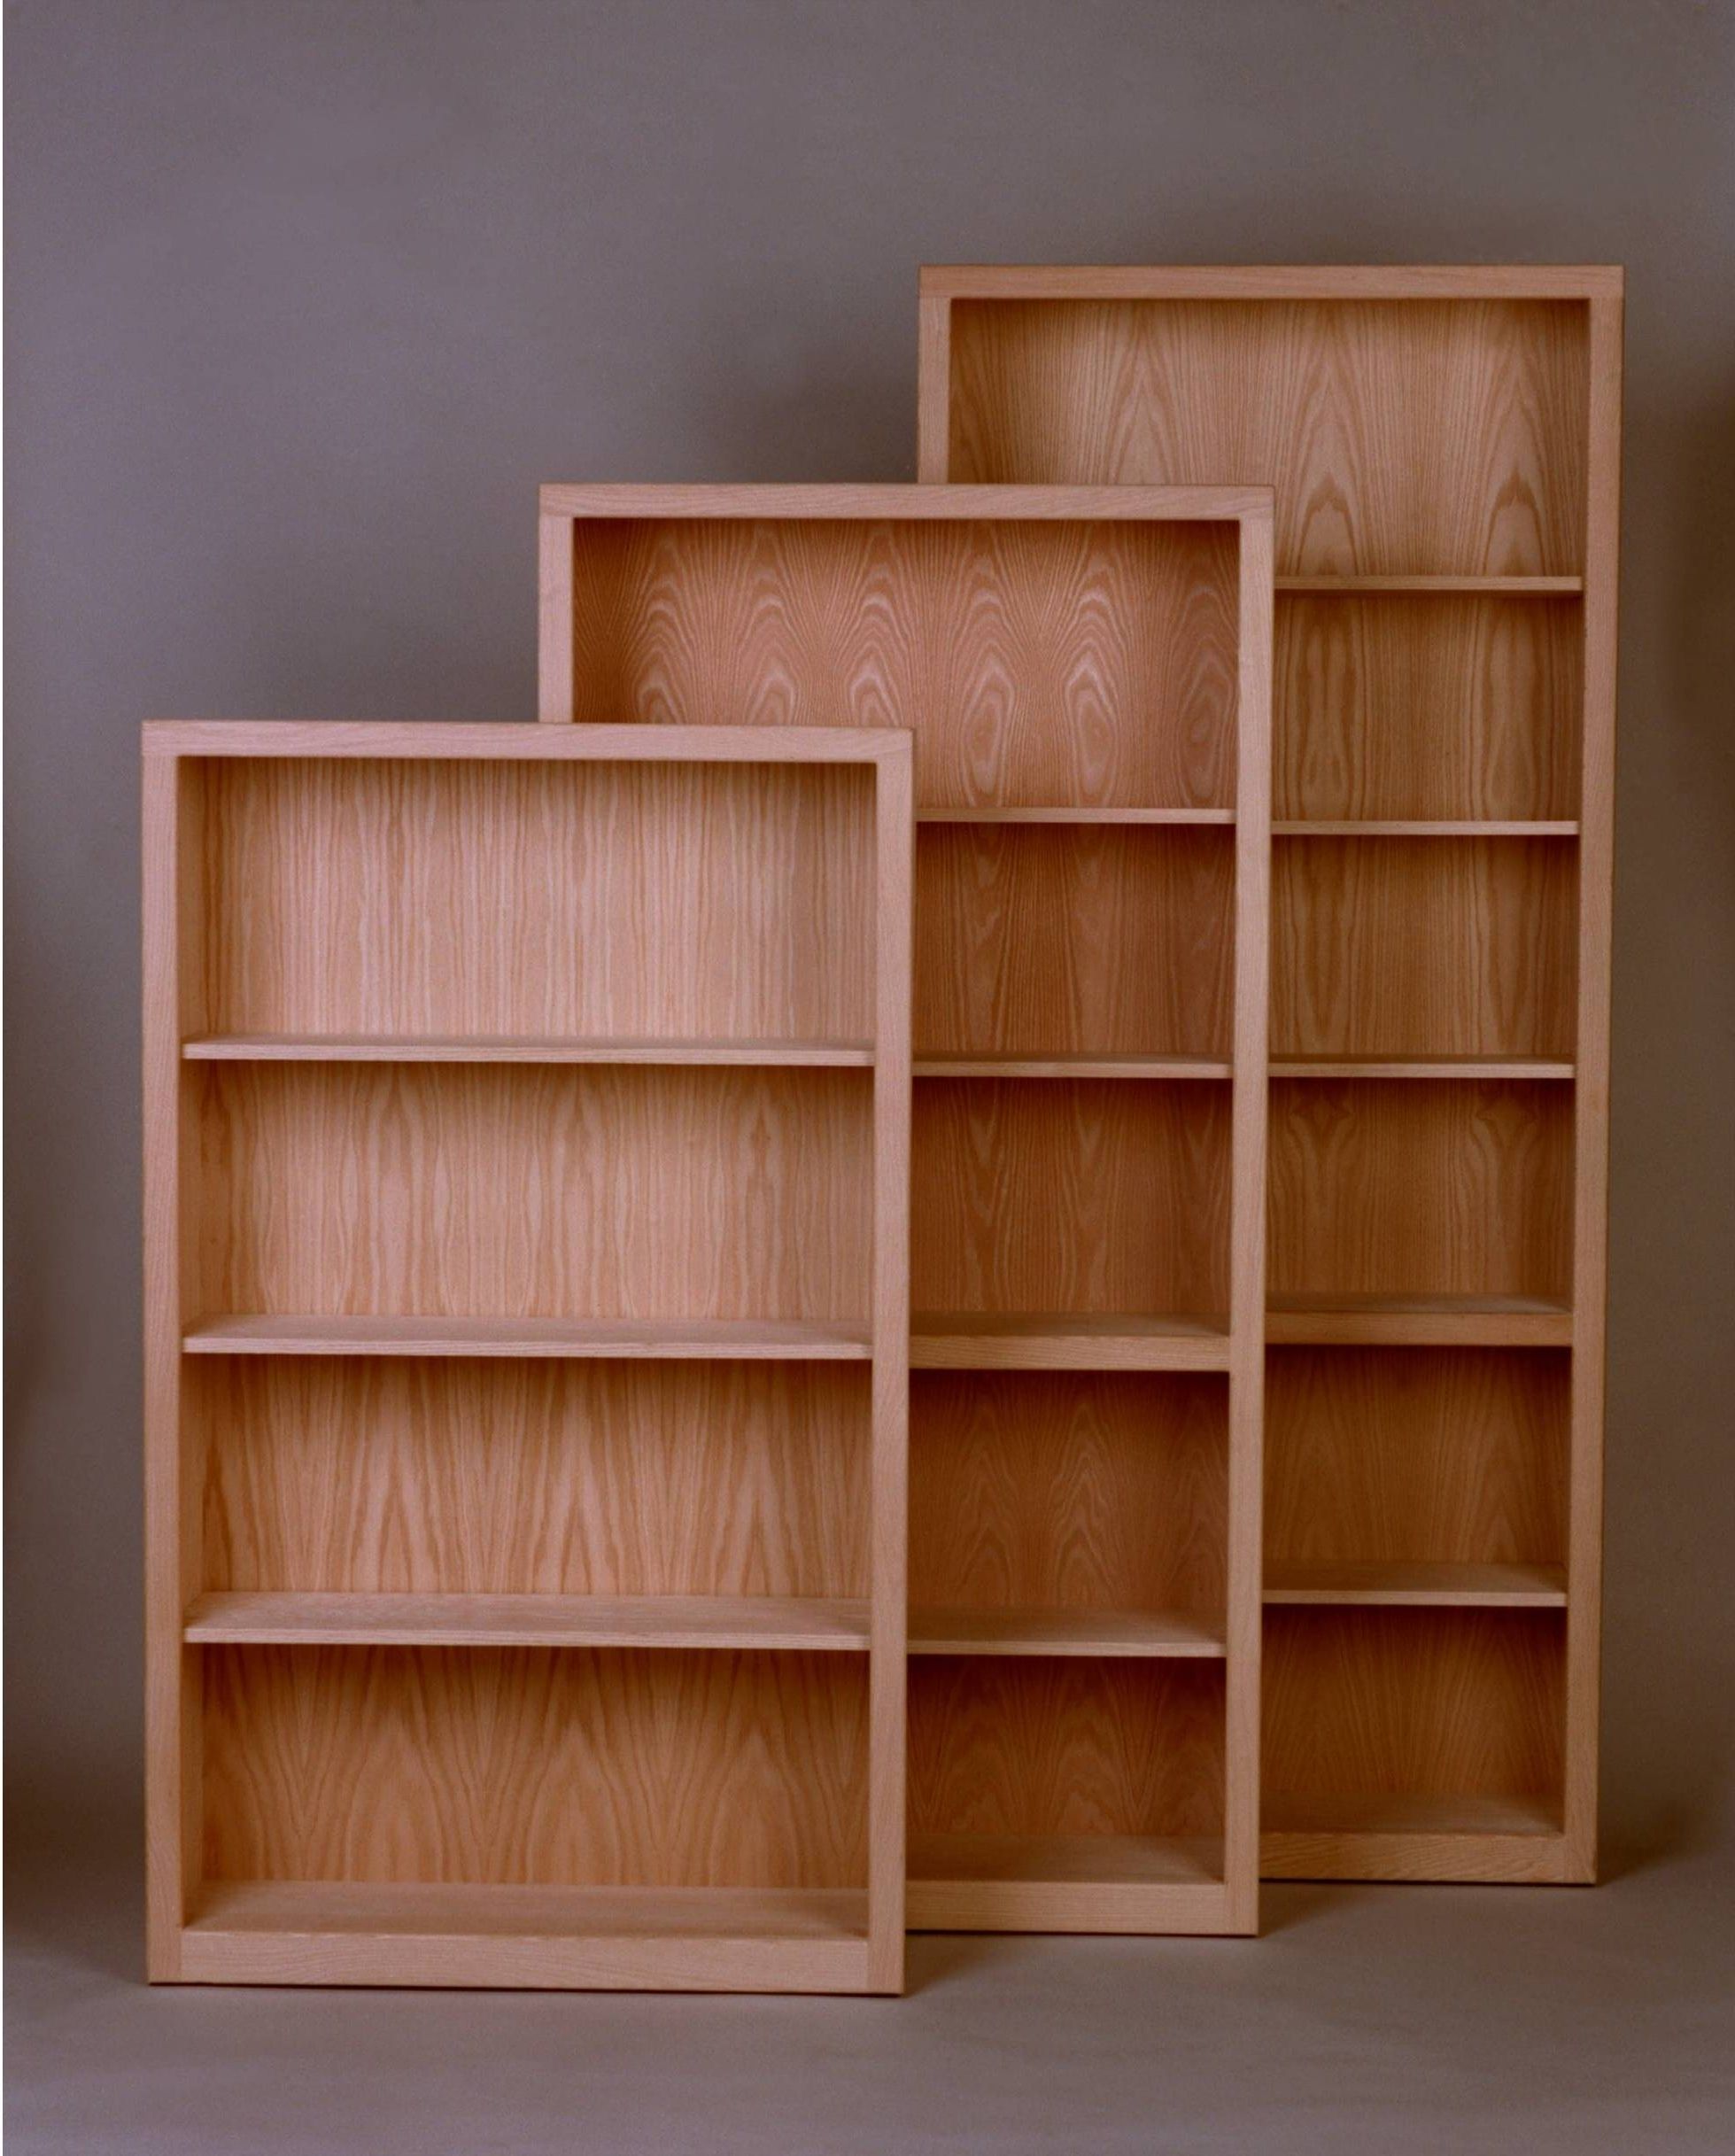 Favorite Contemporary Bookcase 12" Deep Pertaining To Contemporary Oak Bookcases (View 1 of 15)